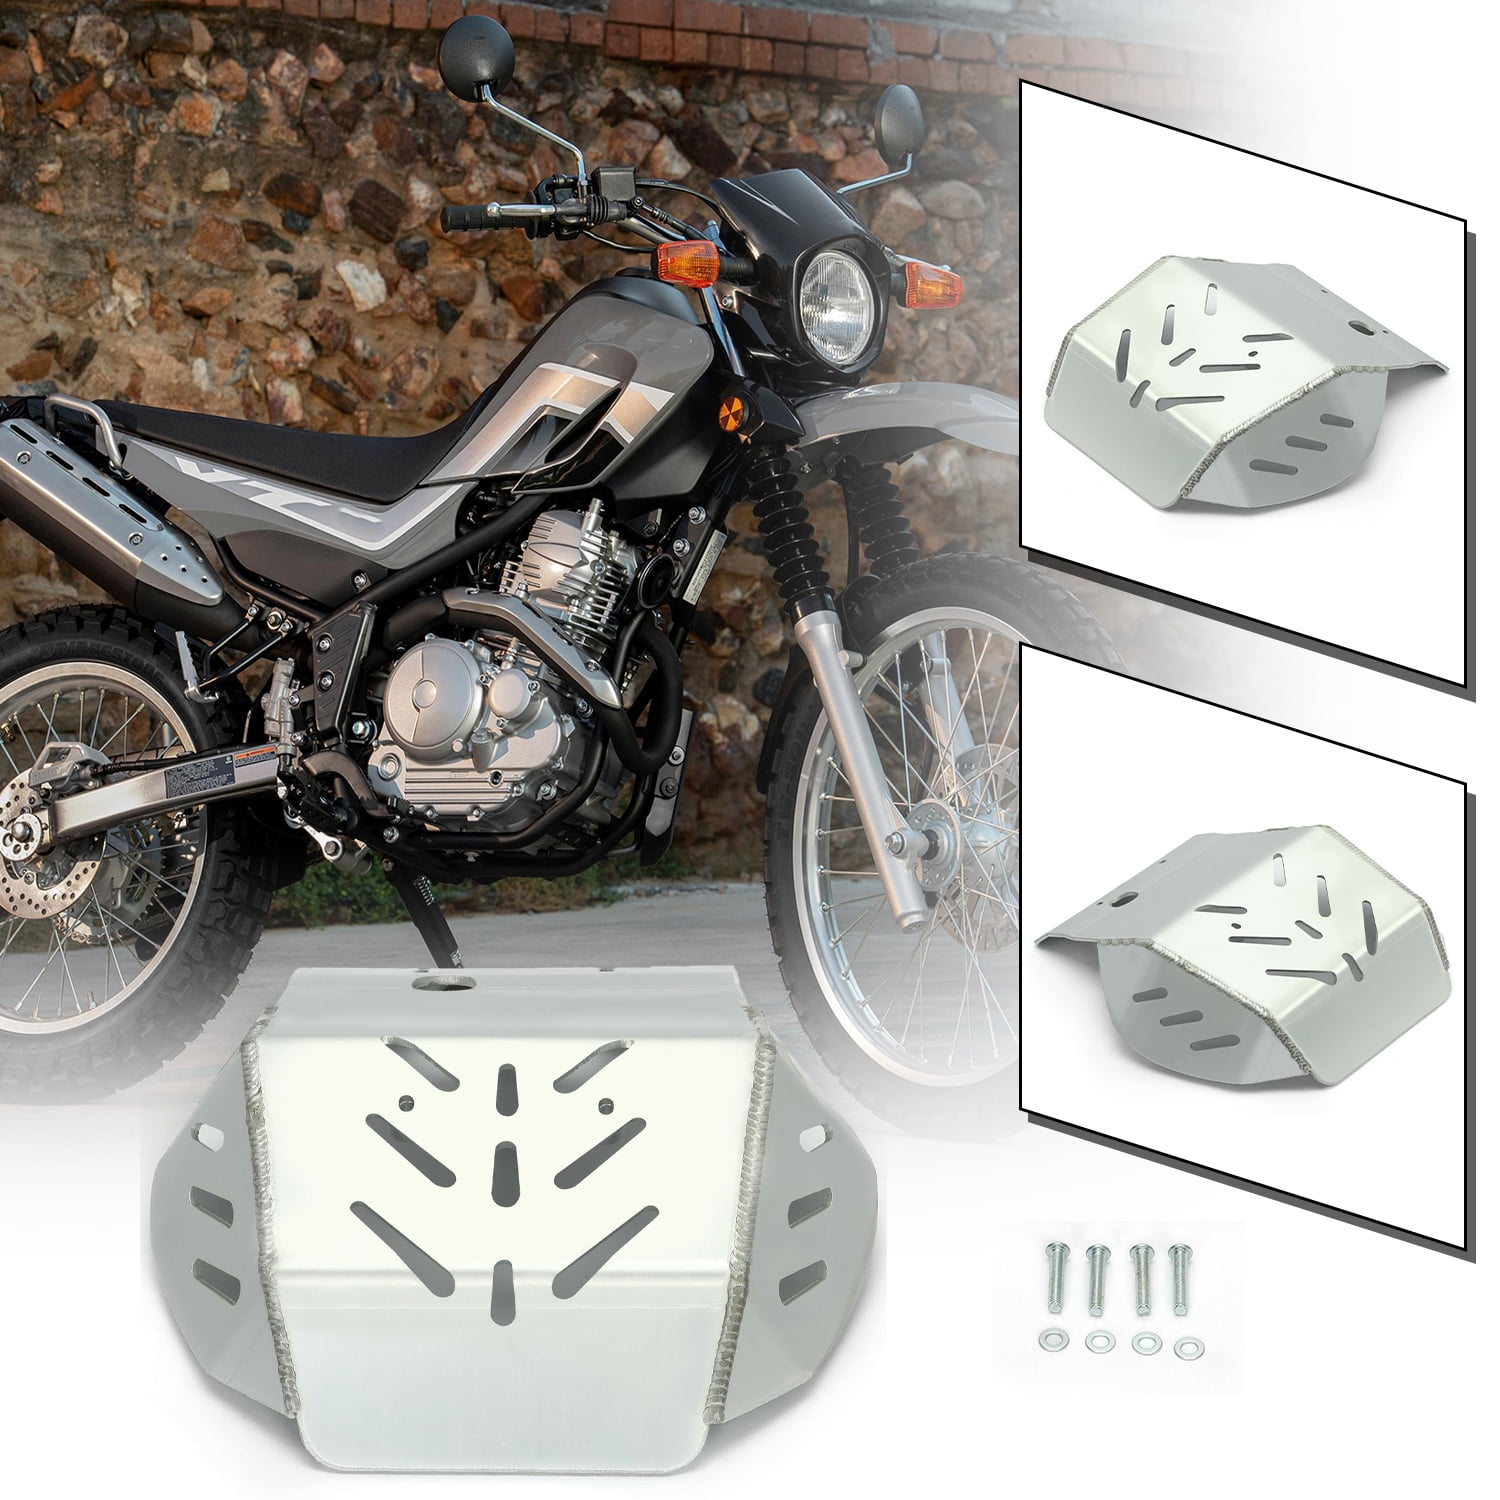 KUAFU Aluminum Engine Skid Plate Silvery Compatible with 2008-2020 Yamaha XT250 Dual Sport Engine Bash Bottom Guard Protector Replacement 